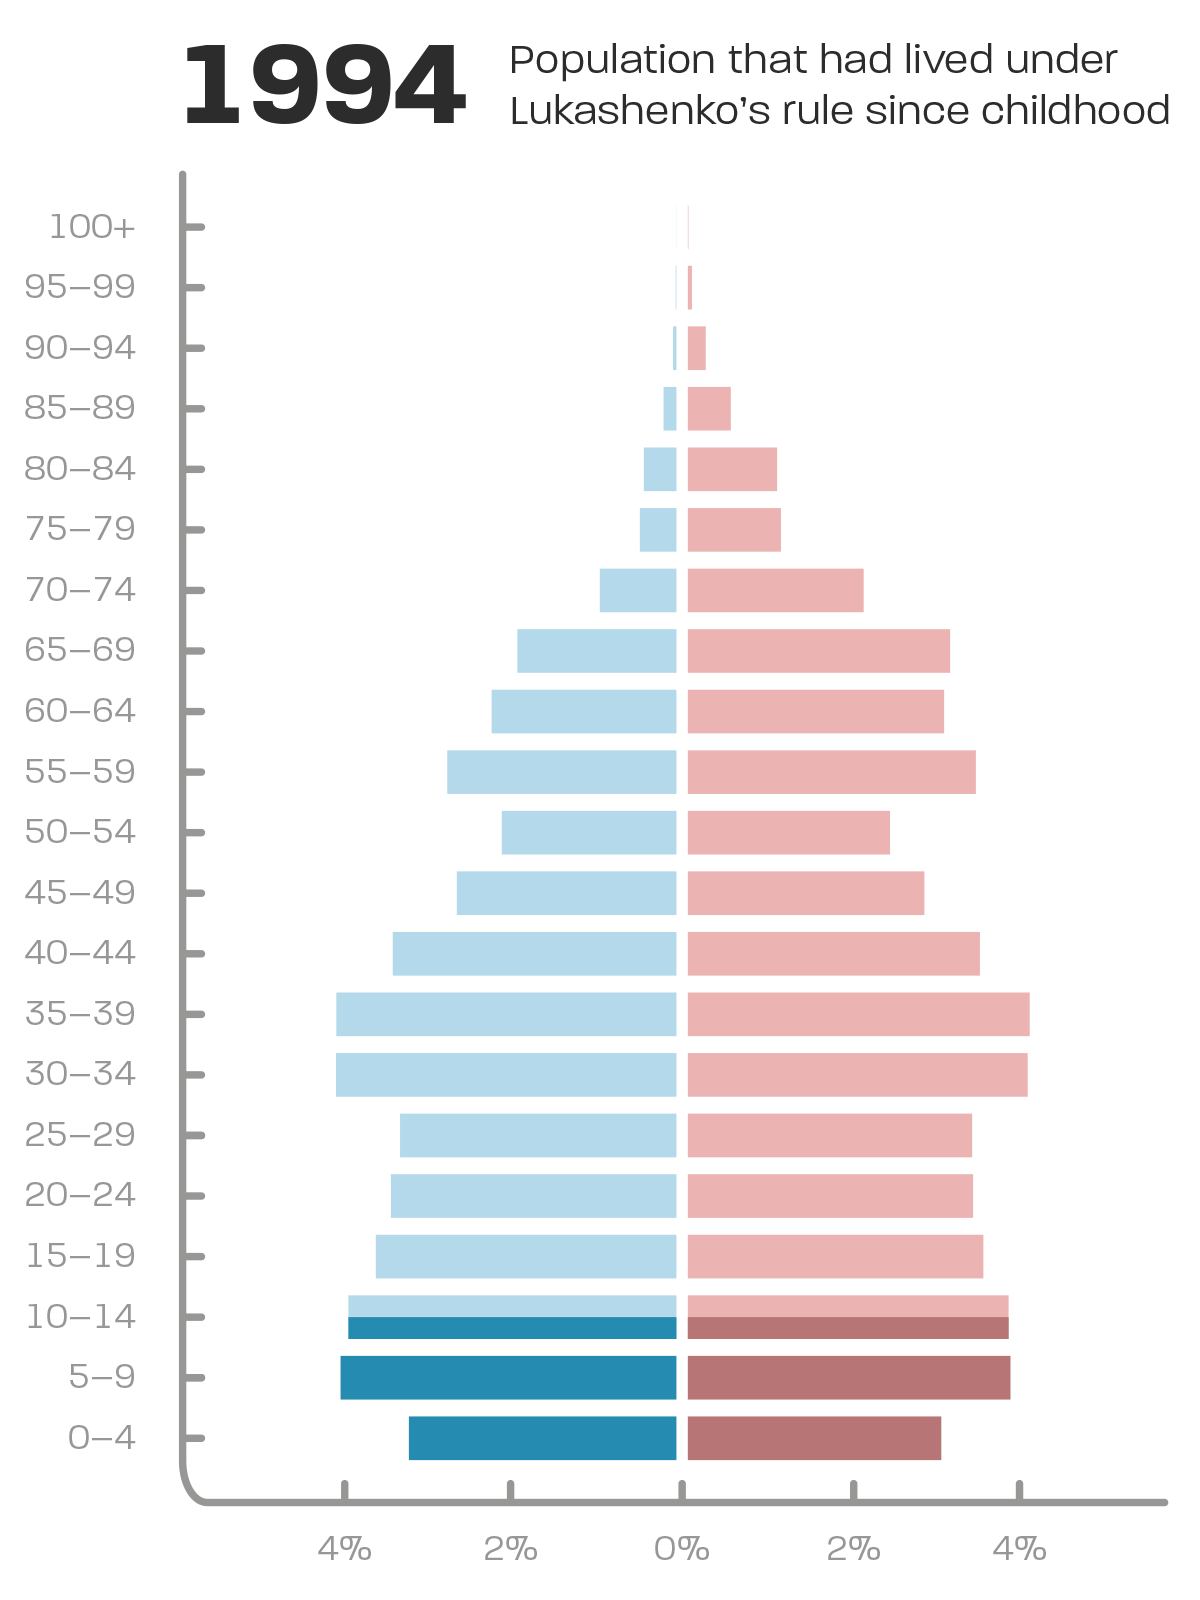 Population pyramid showing that 49.5% of Belarusians have lived under Lukashenko's rule since childhood